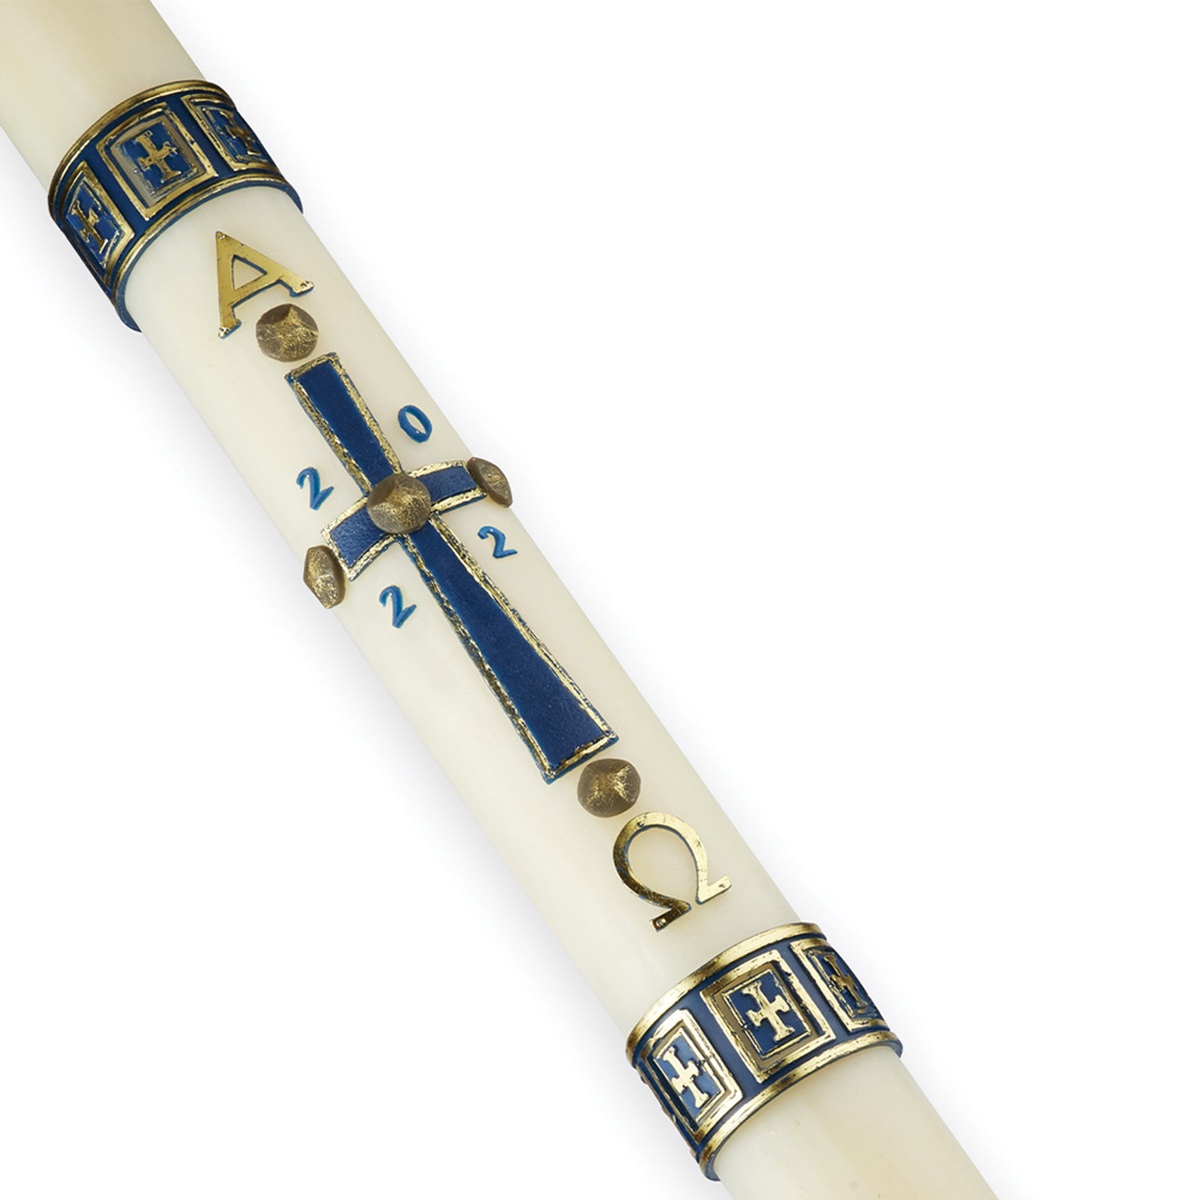 Root Paschal Candle Proclaim the Gospel 2 1/2” x 36”